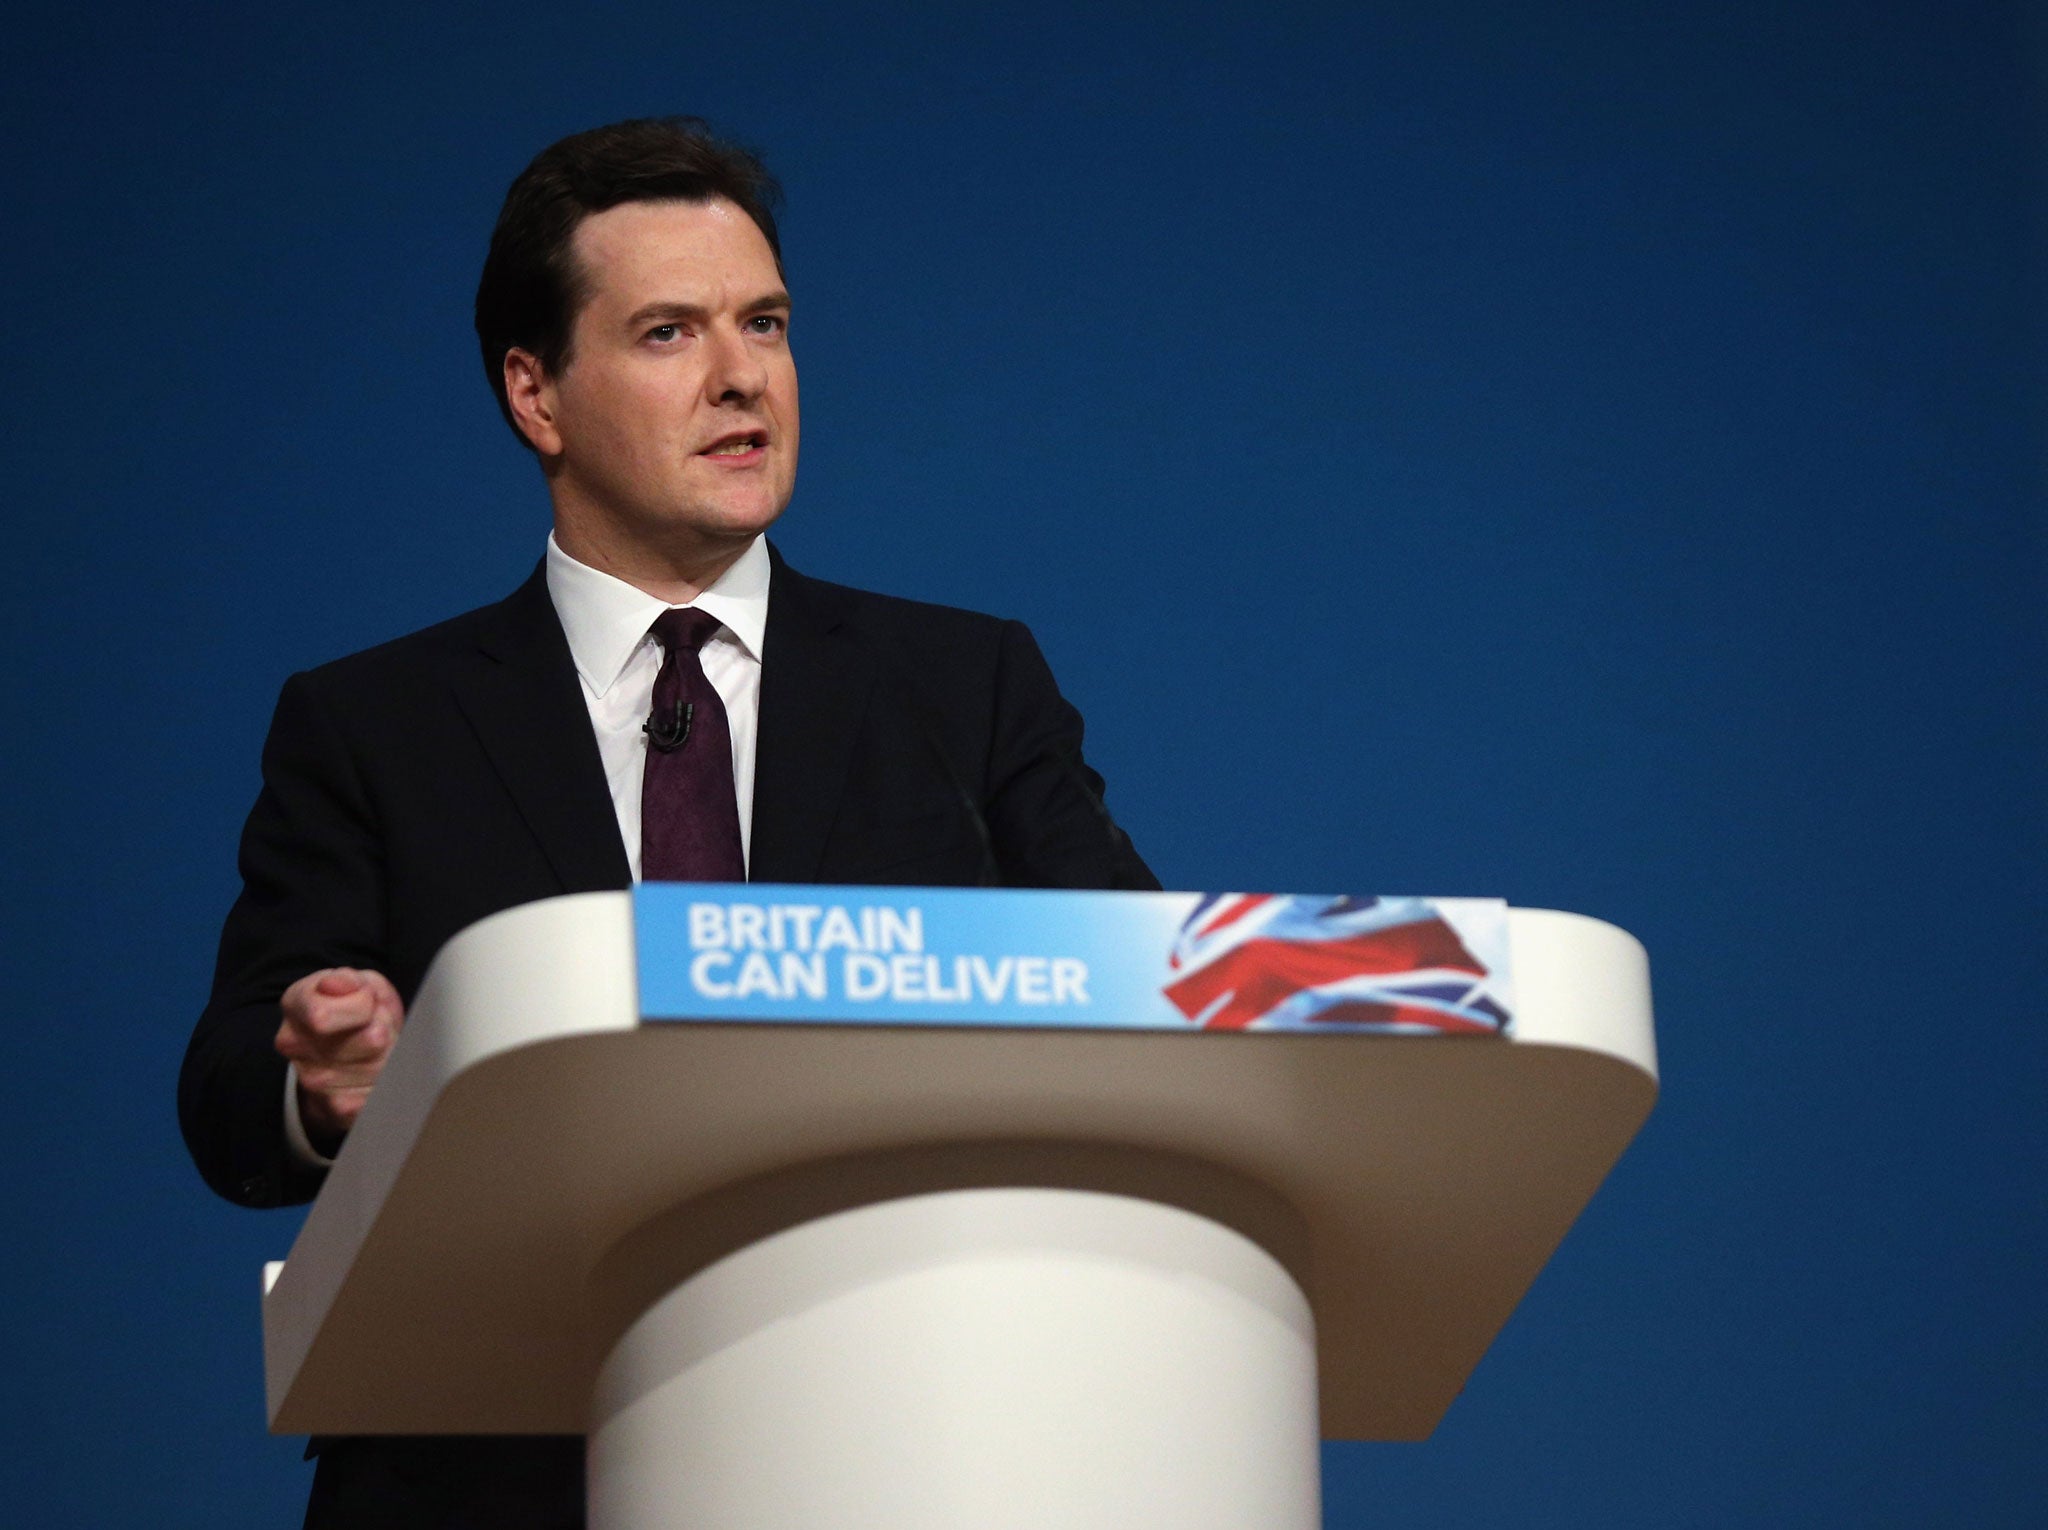 BIRMINGHAM, ENGLAND - OCTOBER 08: Chancellor of the Exchequer George Osborne delivers his speech to the Conservative party conference in the International Convention Centre on October 8, 2012 in Birmingham, England.